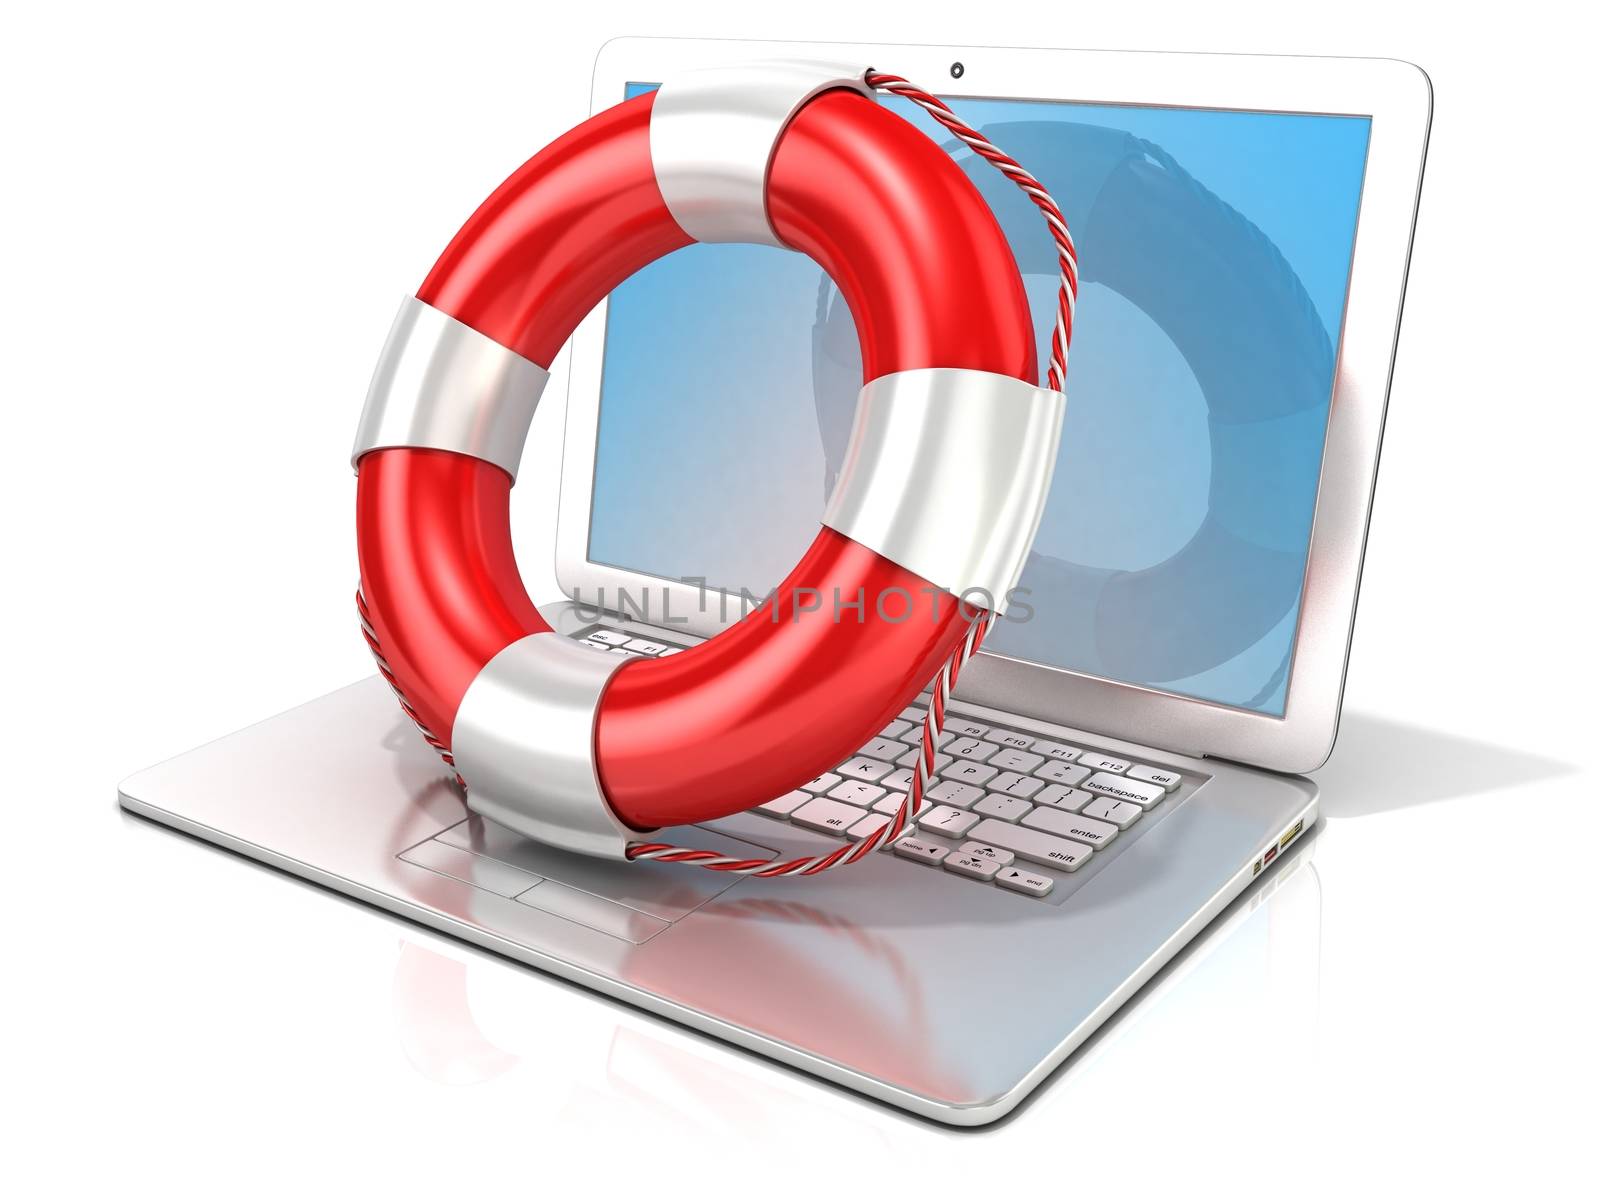 Laptop with lifebuoy. 3D rendering - concept of computer, online help and safety internet surfing. Isolated on white background